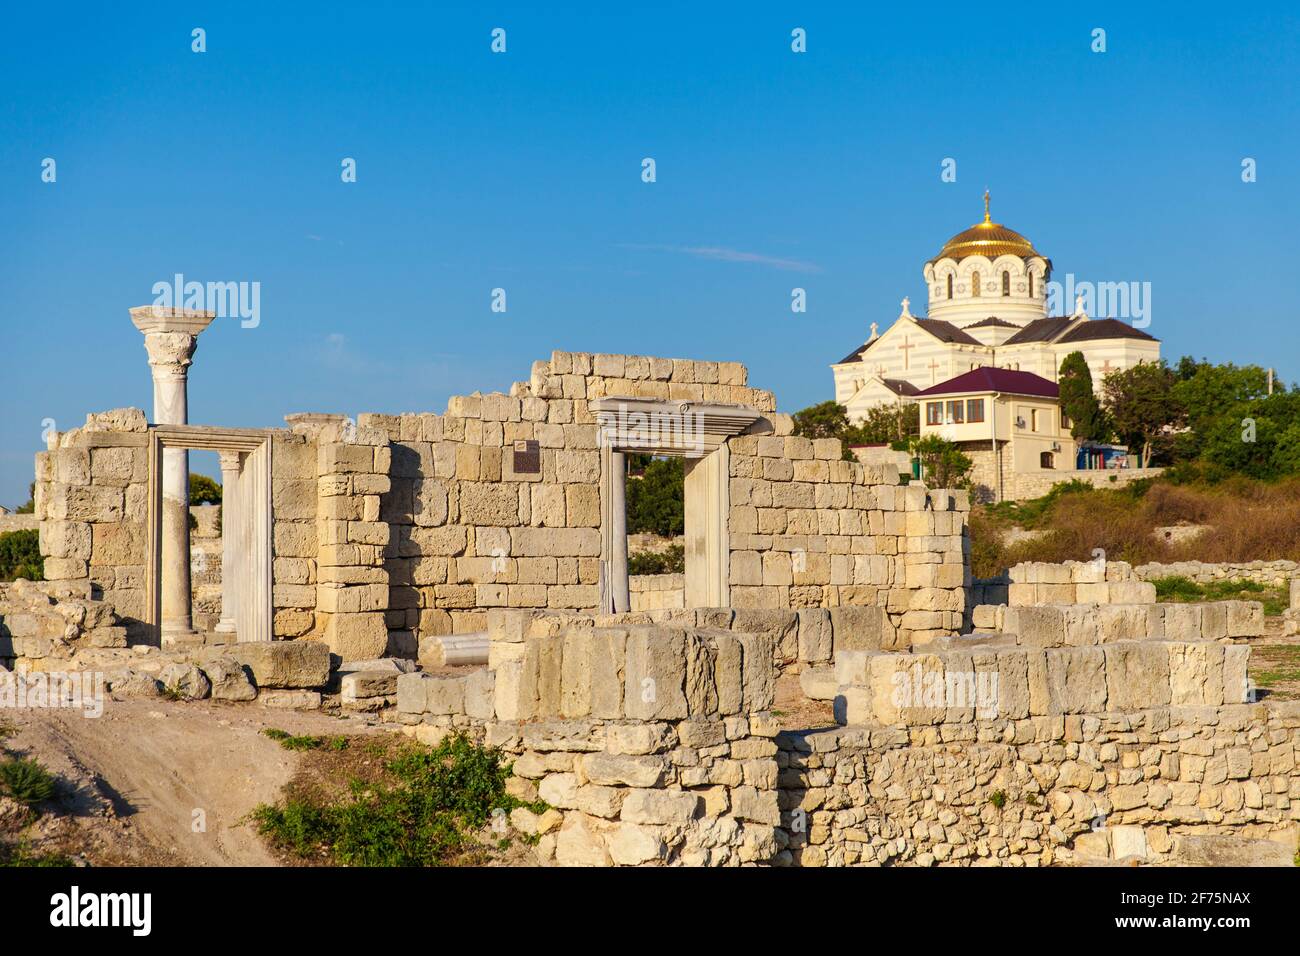 Ukraine, Crimea, Sevastopol, Ruins of Ancient City of Khersoness, Ancient theatre, St Vladimir's Cathedral in background Stock Photo